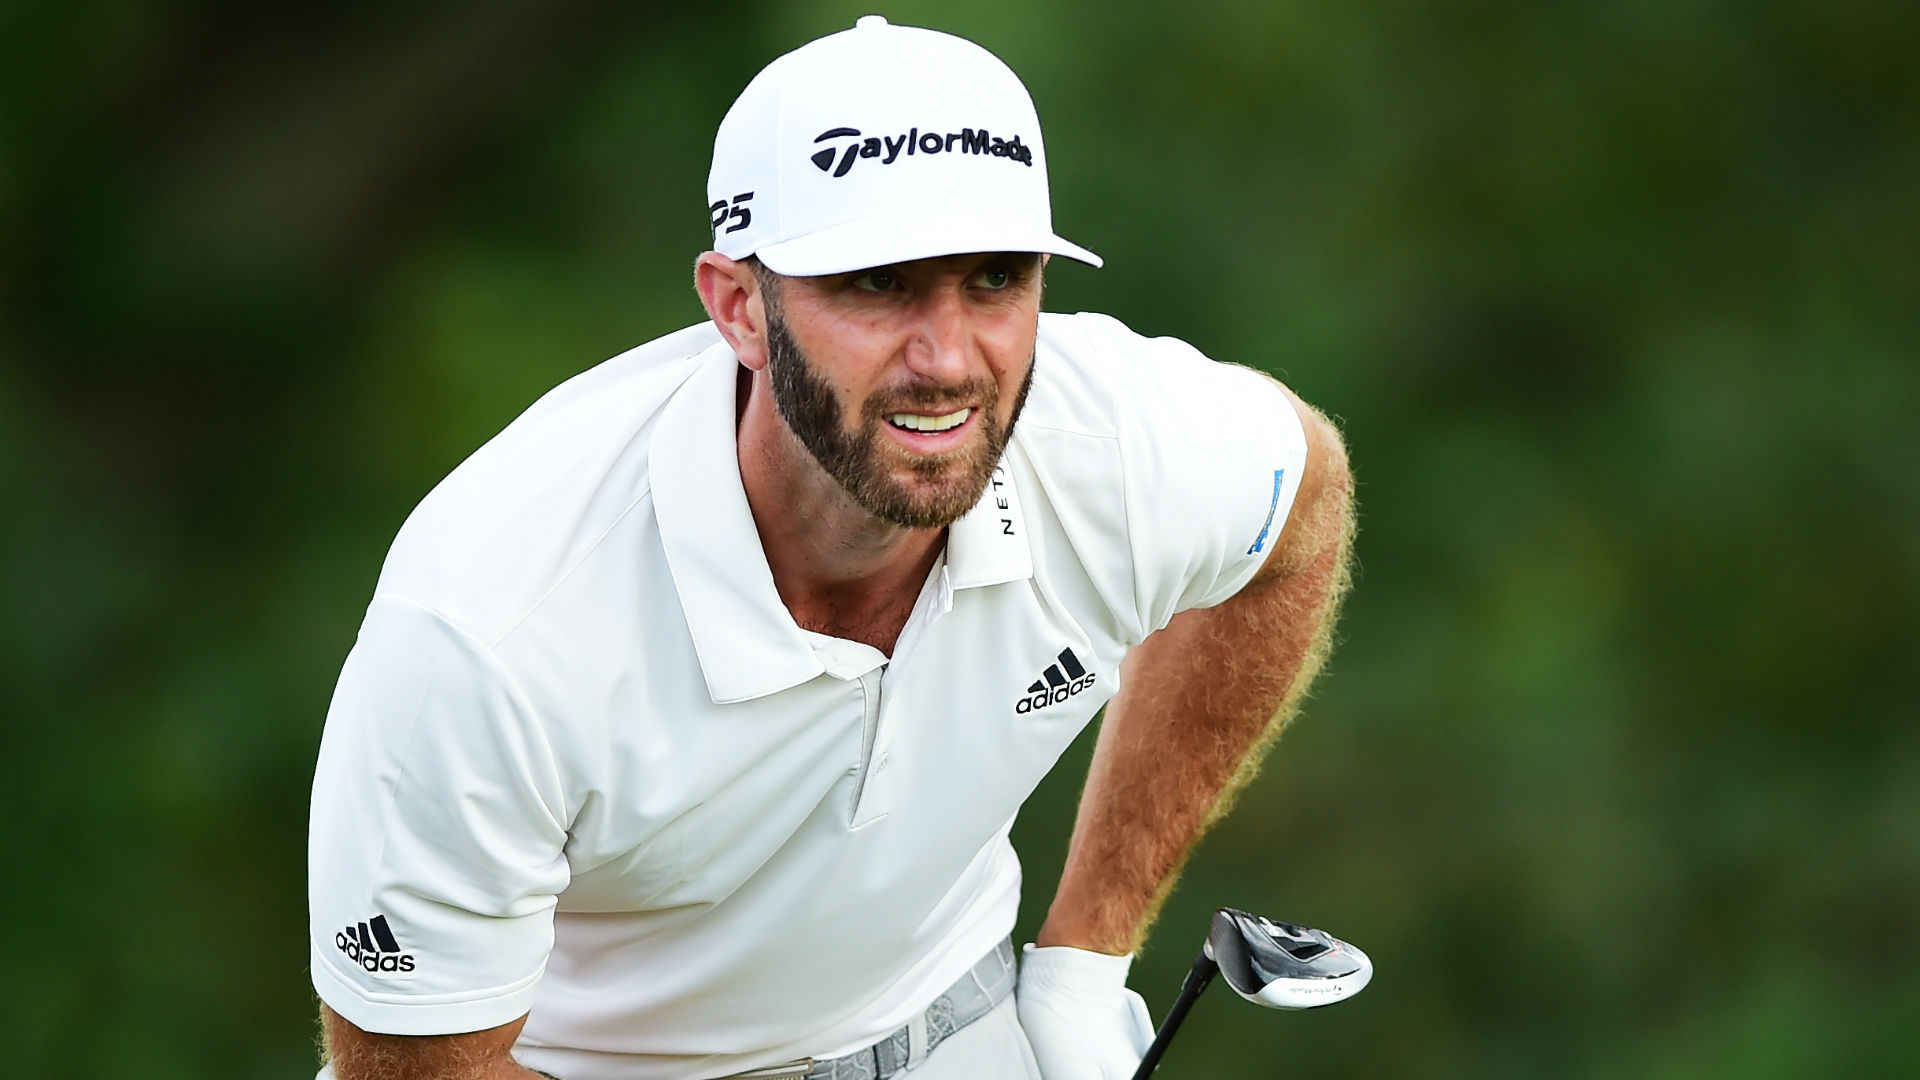 Dustin Johnson Finds His Putting Stroke, Leads Northern Trust